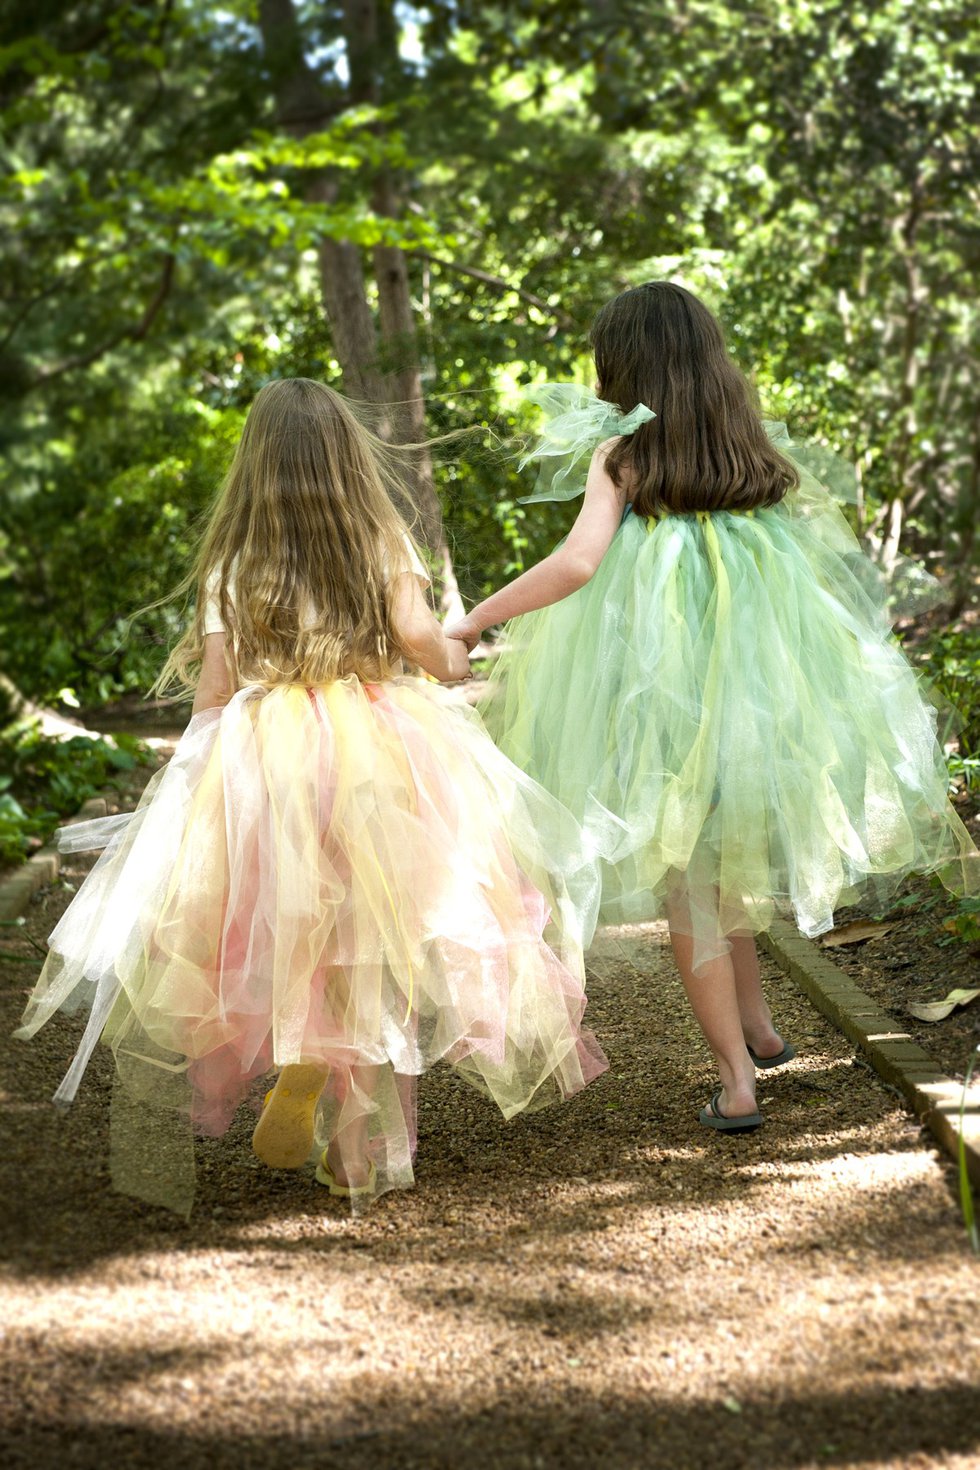 If you see a fairy, make a wish.For it’s good luck to spot one,on a warm spring day.